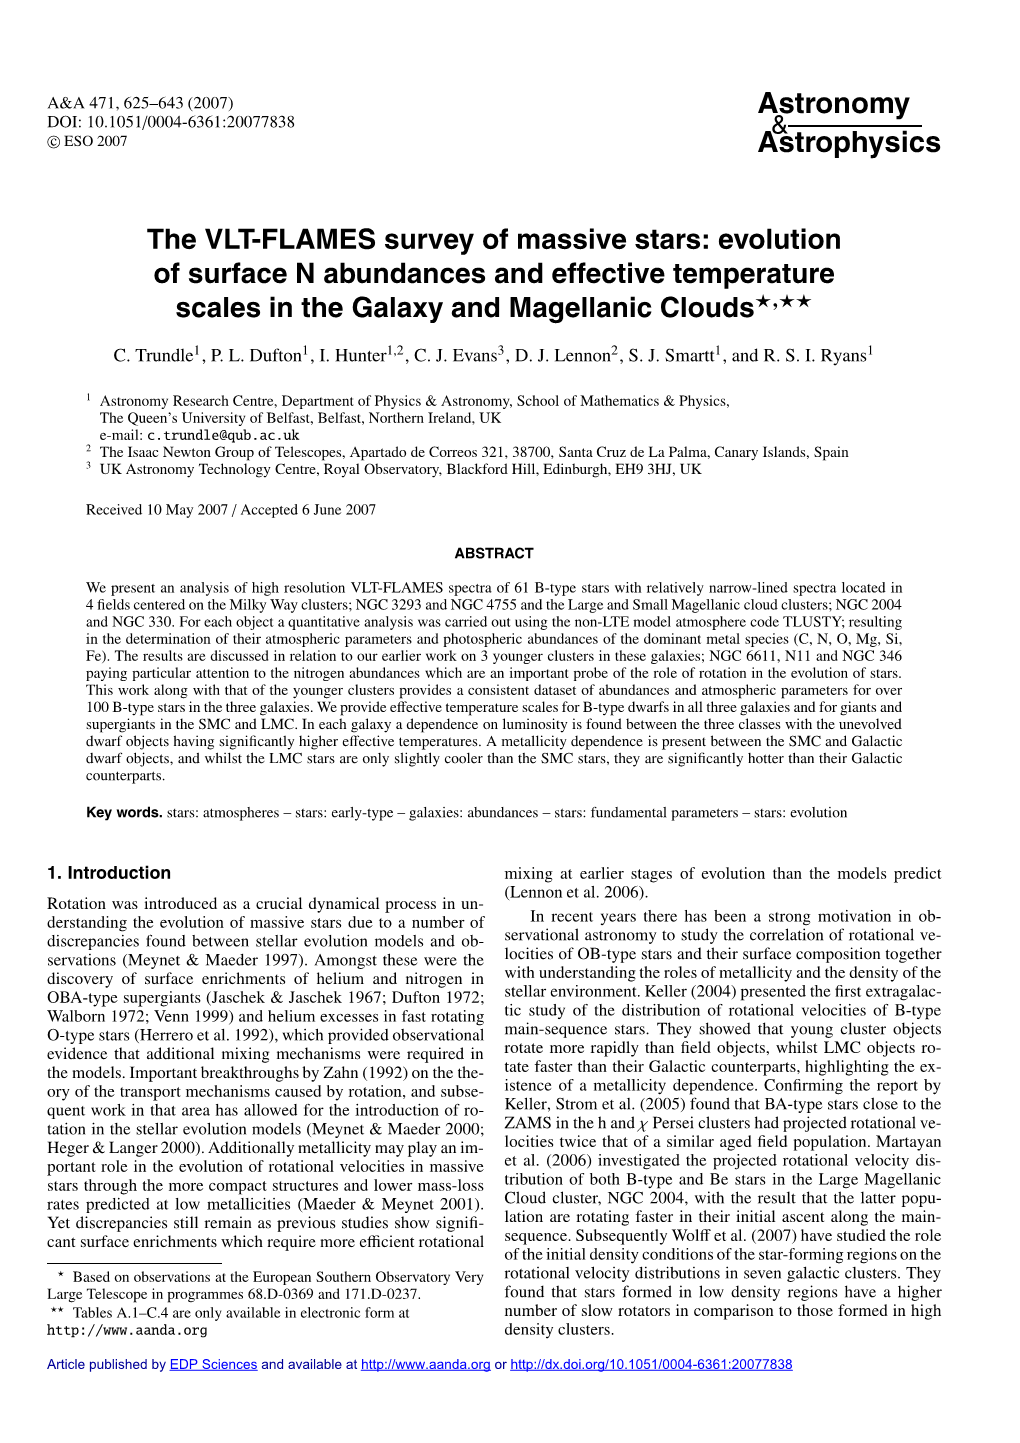 Evolution of Surface N Abundances and Effective Temperature Scales in the Galaxy and Magellanic Clouds�,